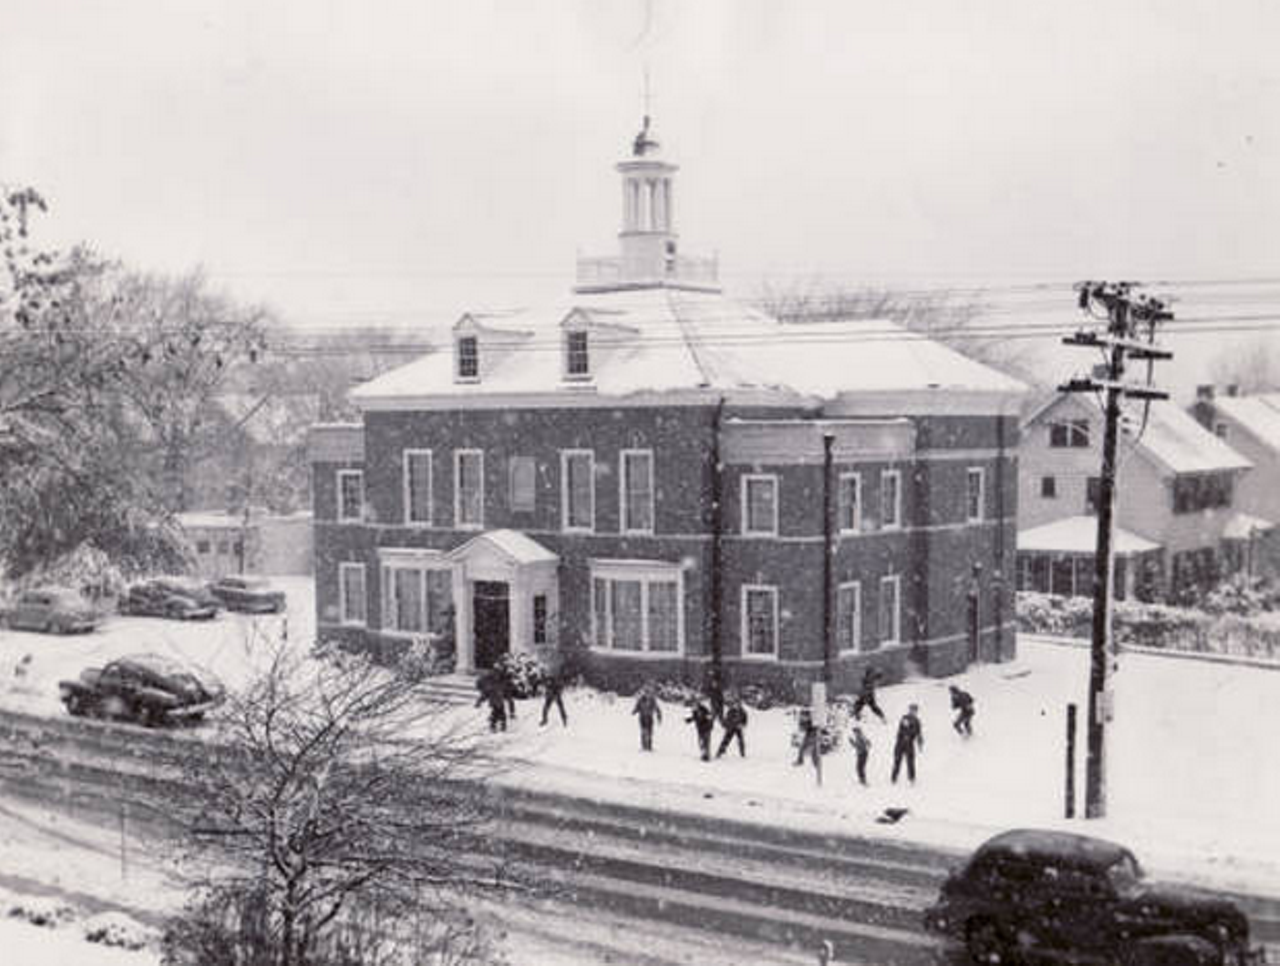 Snowball fight outside the old YMCA building in Cleveland Heights, date unknown.